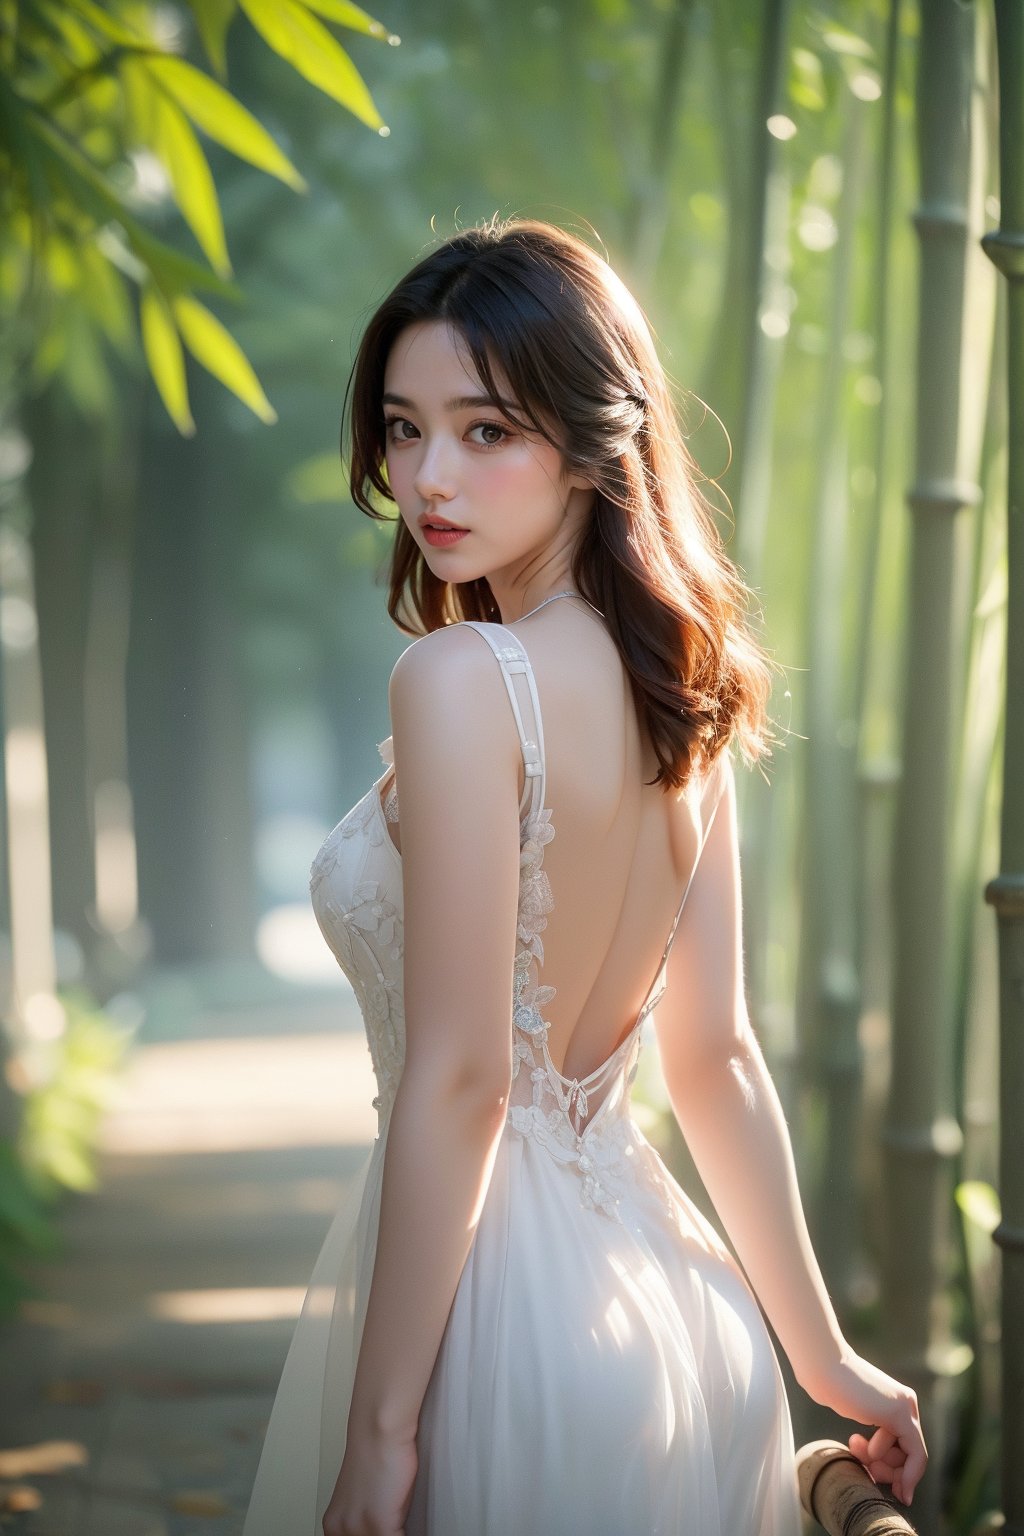 This photo, likely taken by a contemporary artist, shows a woman wearing an exquisite backless white tulle dress.  The composition is very balanced. Shot from an elevated angle, the woman's position is slightly off-center.  She gazes back with a smile, bathed in natural light filtering through a tunnel of towering, dense bamboo groves.  The background is a dense bamboo forest, creating a tranquil and mysterious atmosphere.  Sunlight passes through the leaves, casting dreamlike beams of light that highlight the quiet atmosphere and the texture of the plants.  The overall scene evokes a sense of calm and connection with nature.